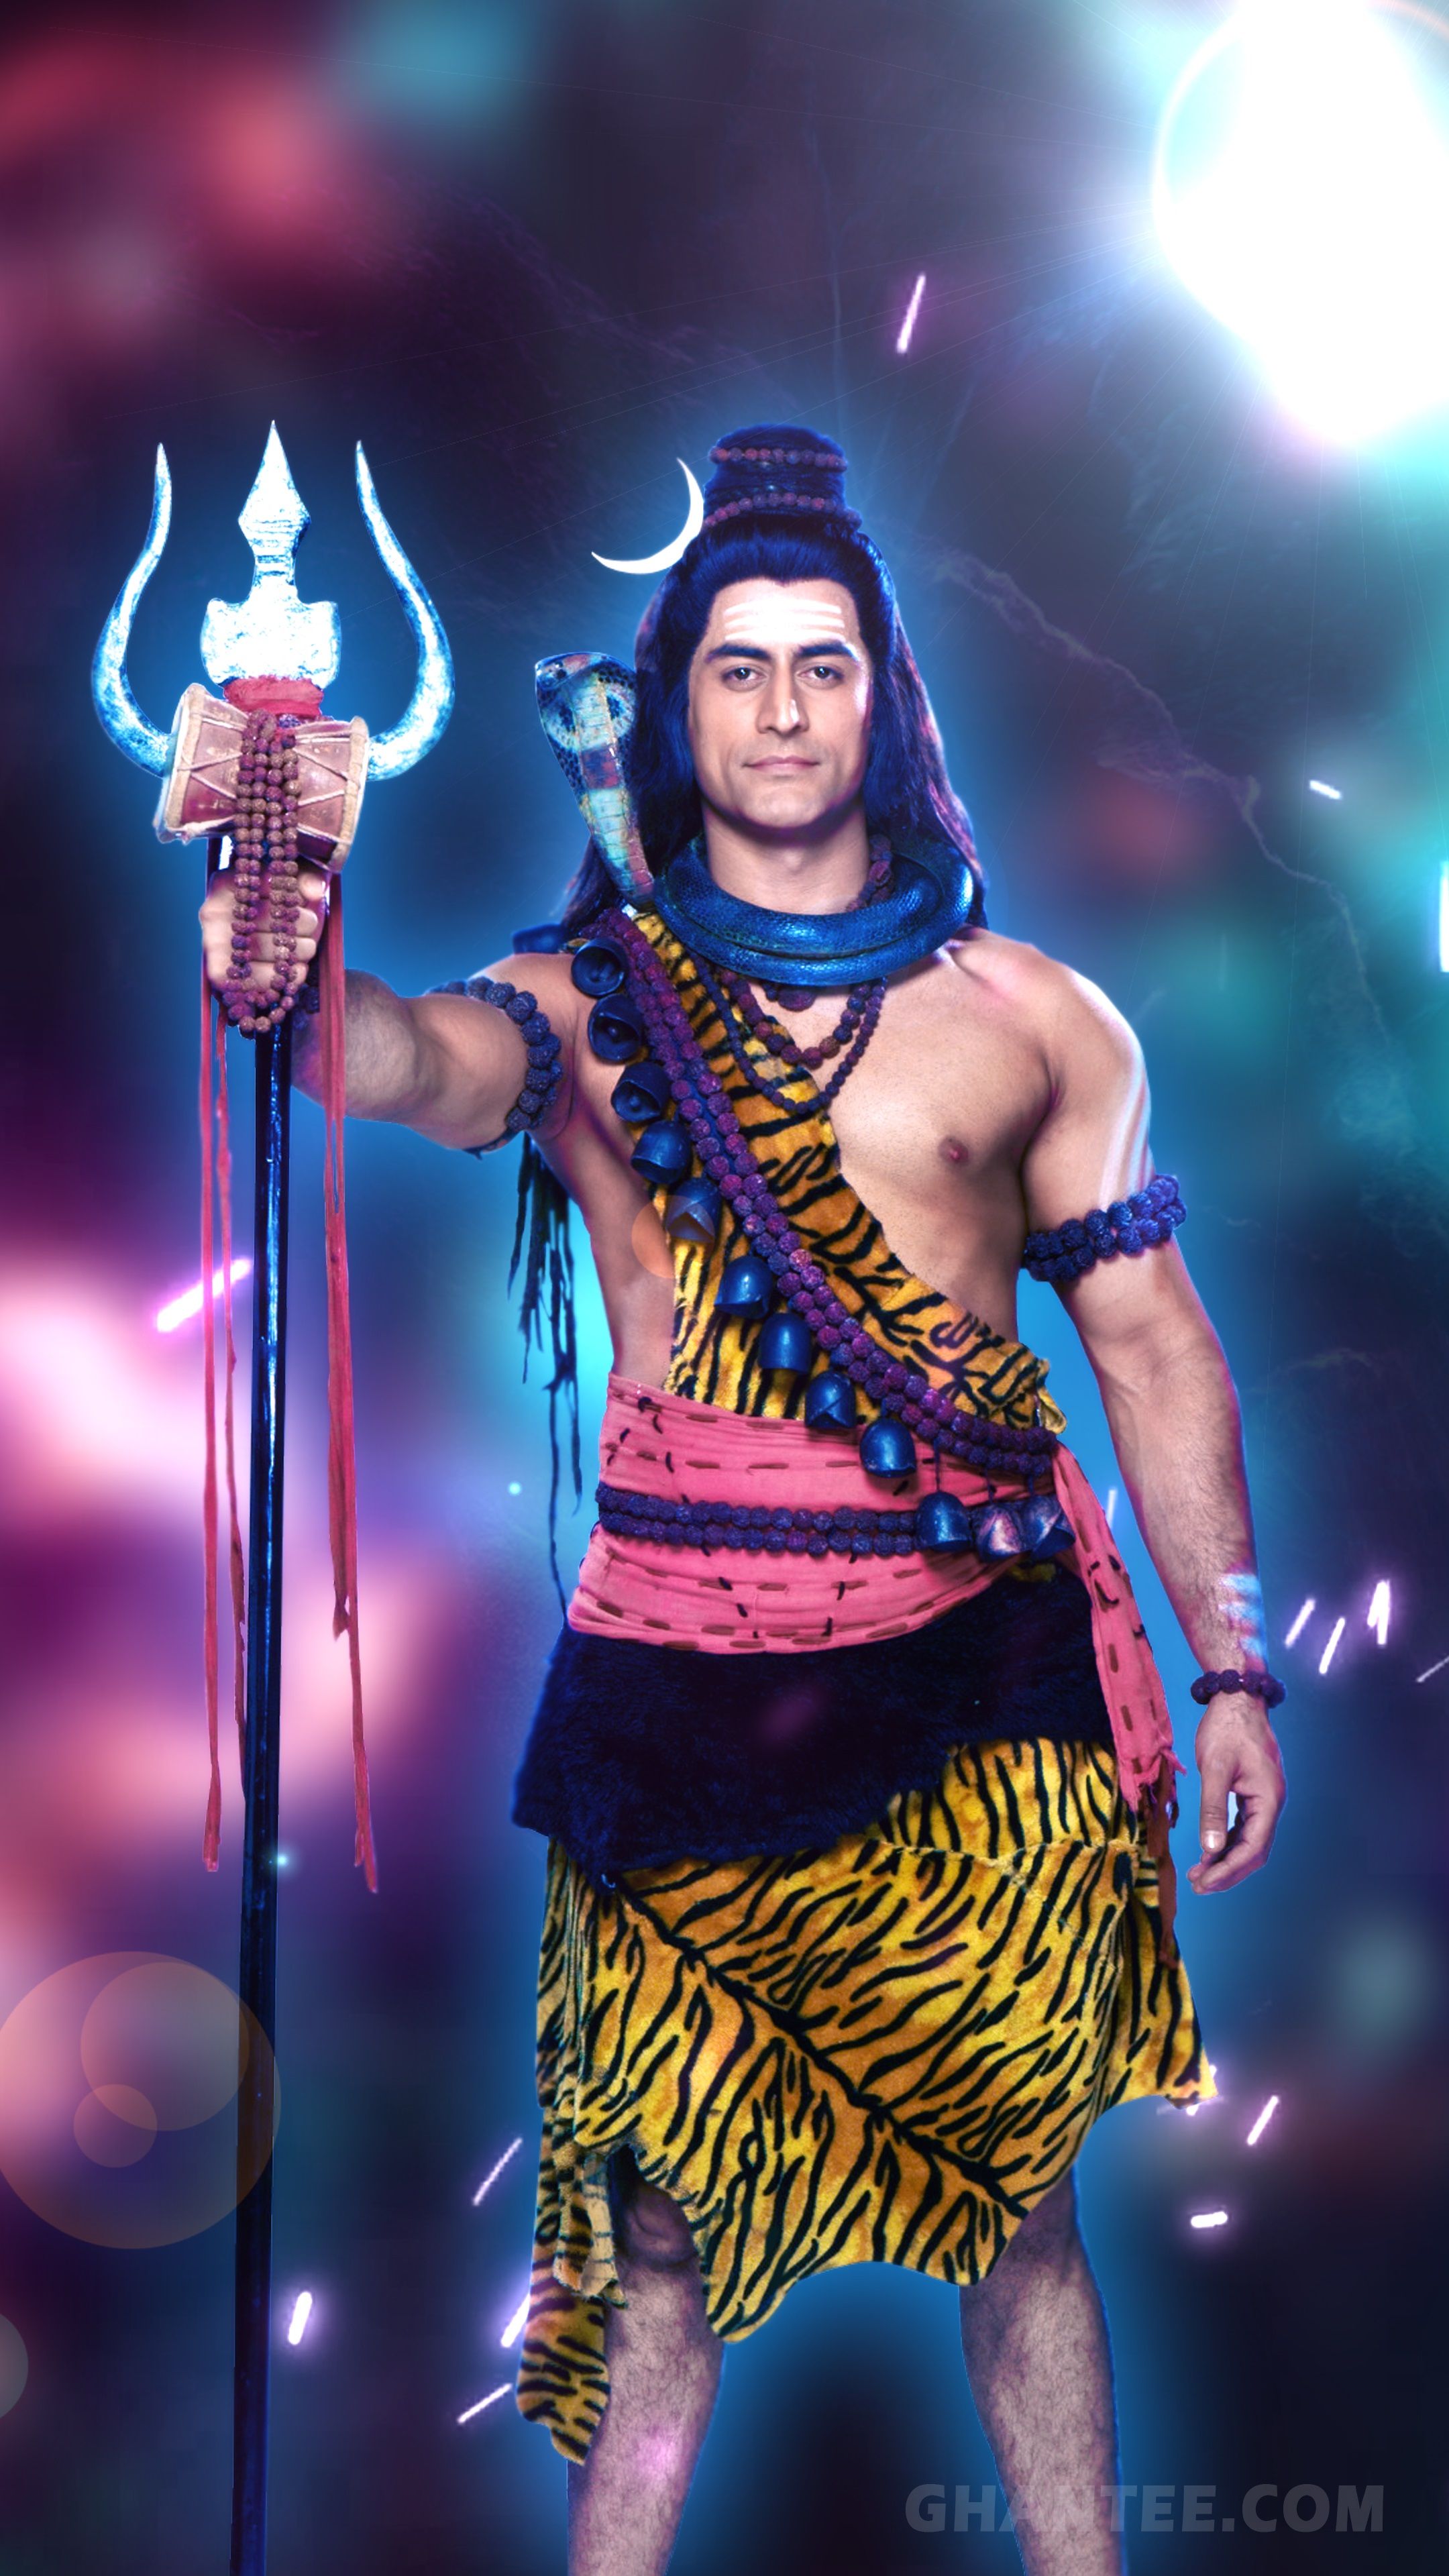 4k Mobile Lord Shiva Wallpapers - Wallpaper Cave